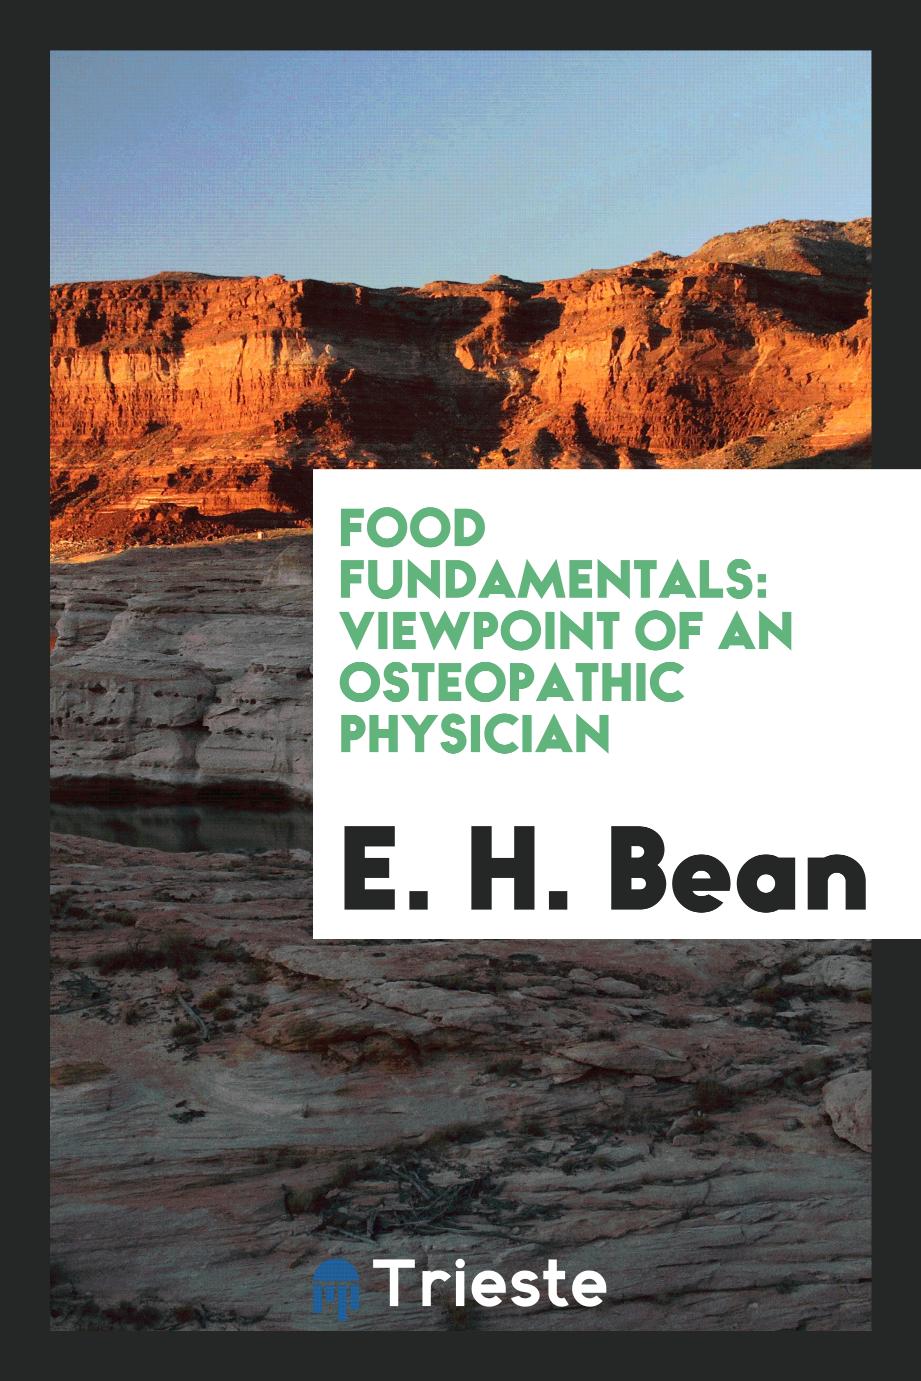 Food fundamentals: viewpoint of an osteopathic physician